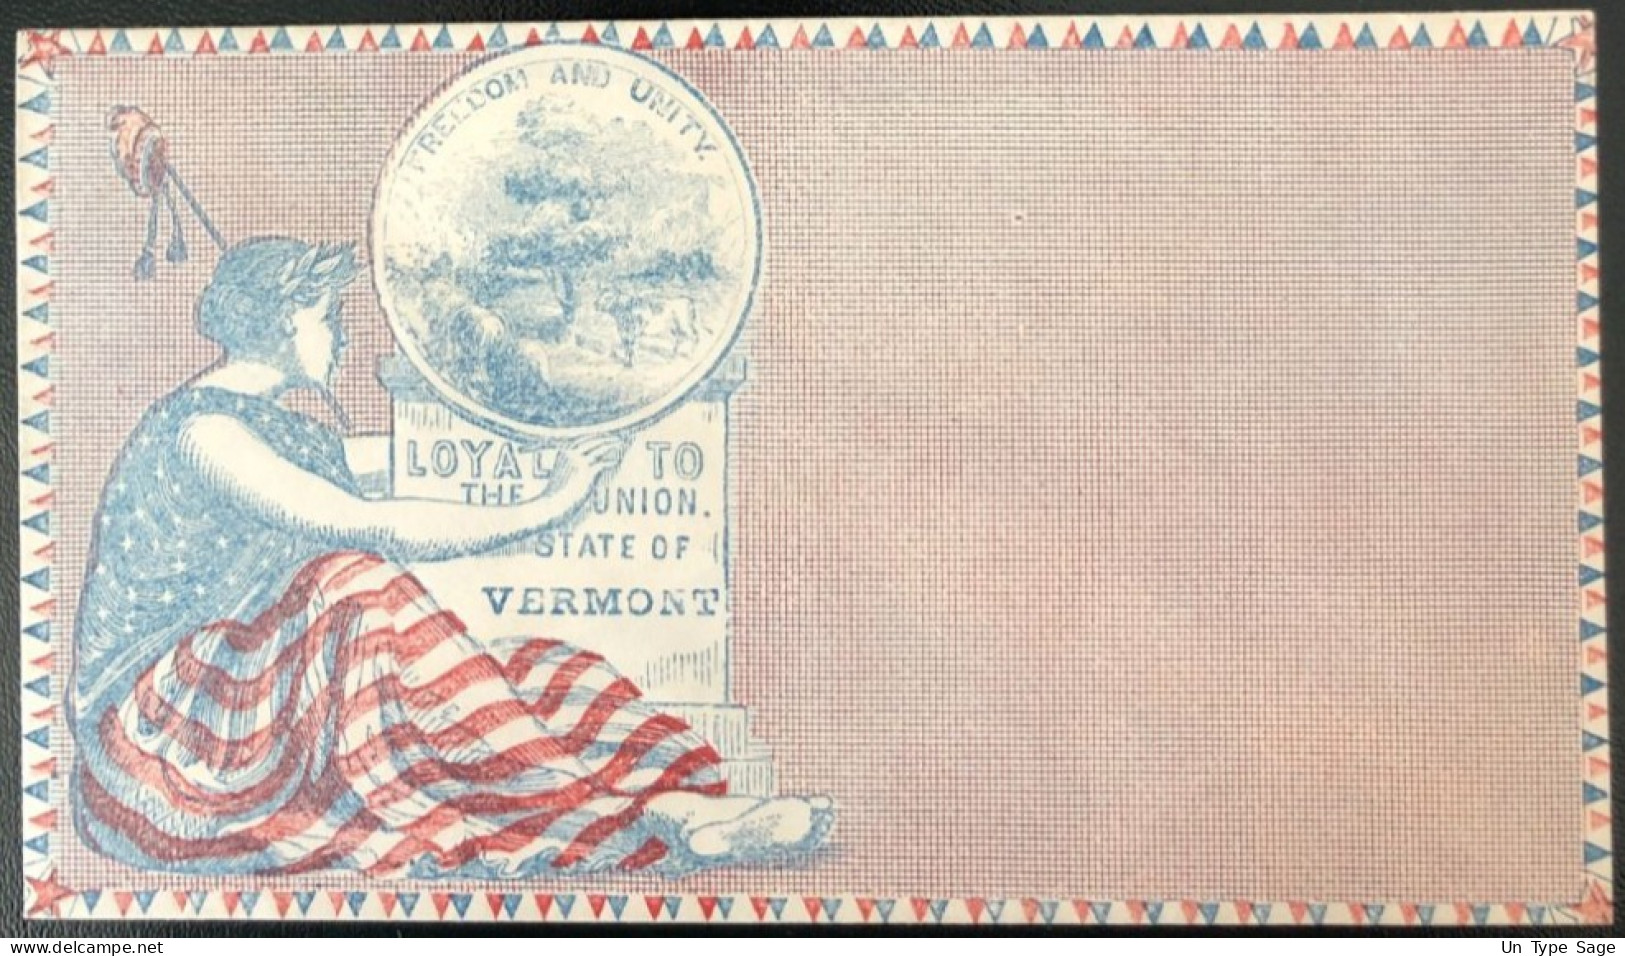 U.S.A, Civil War, Patriotic Cover - "Loyal To The Union. State Of VERMONT" - Unused - (C456) - Postal History